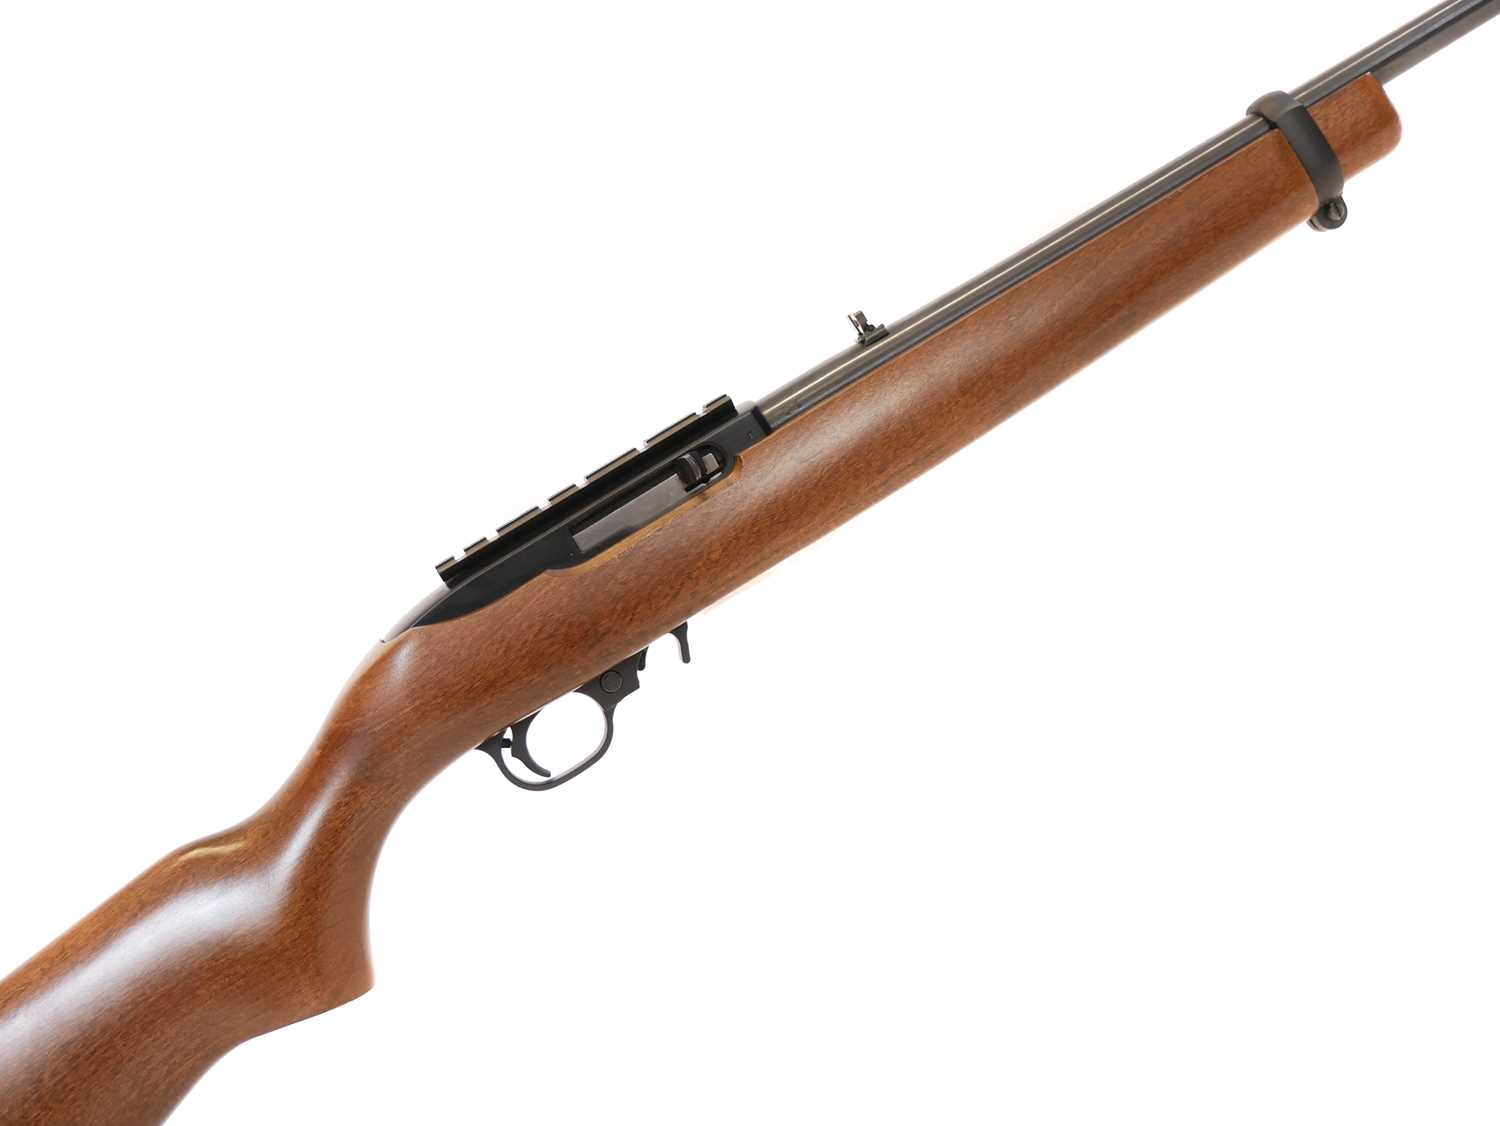 Ruger 10-22 .22lr semi auto rifle and moderator, serial number 356-73813, 16.5inch barrel fitted